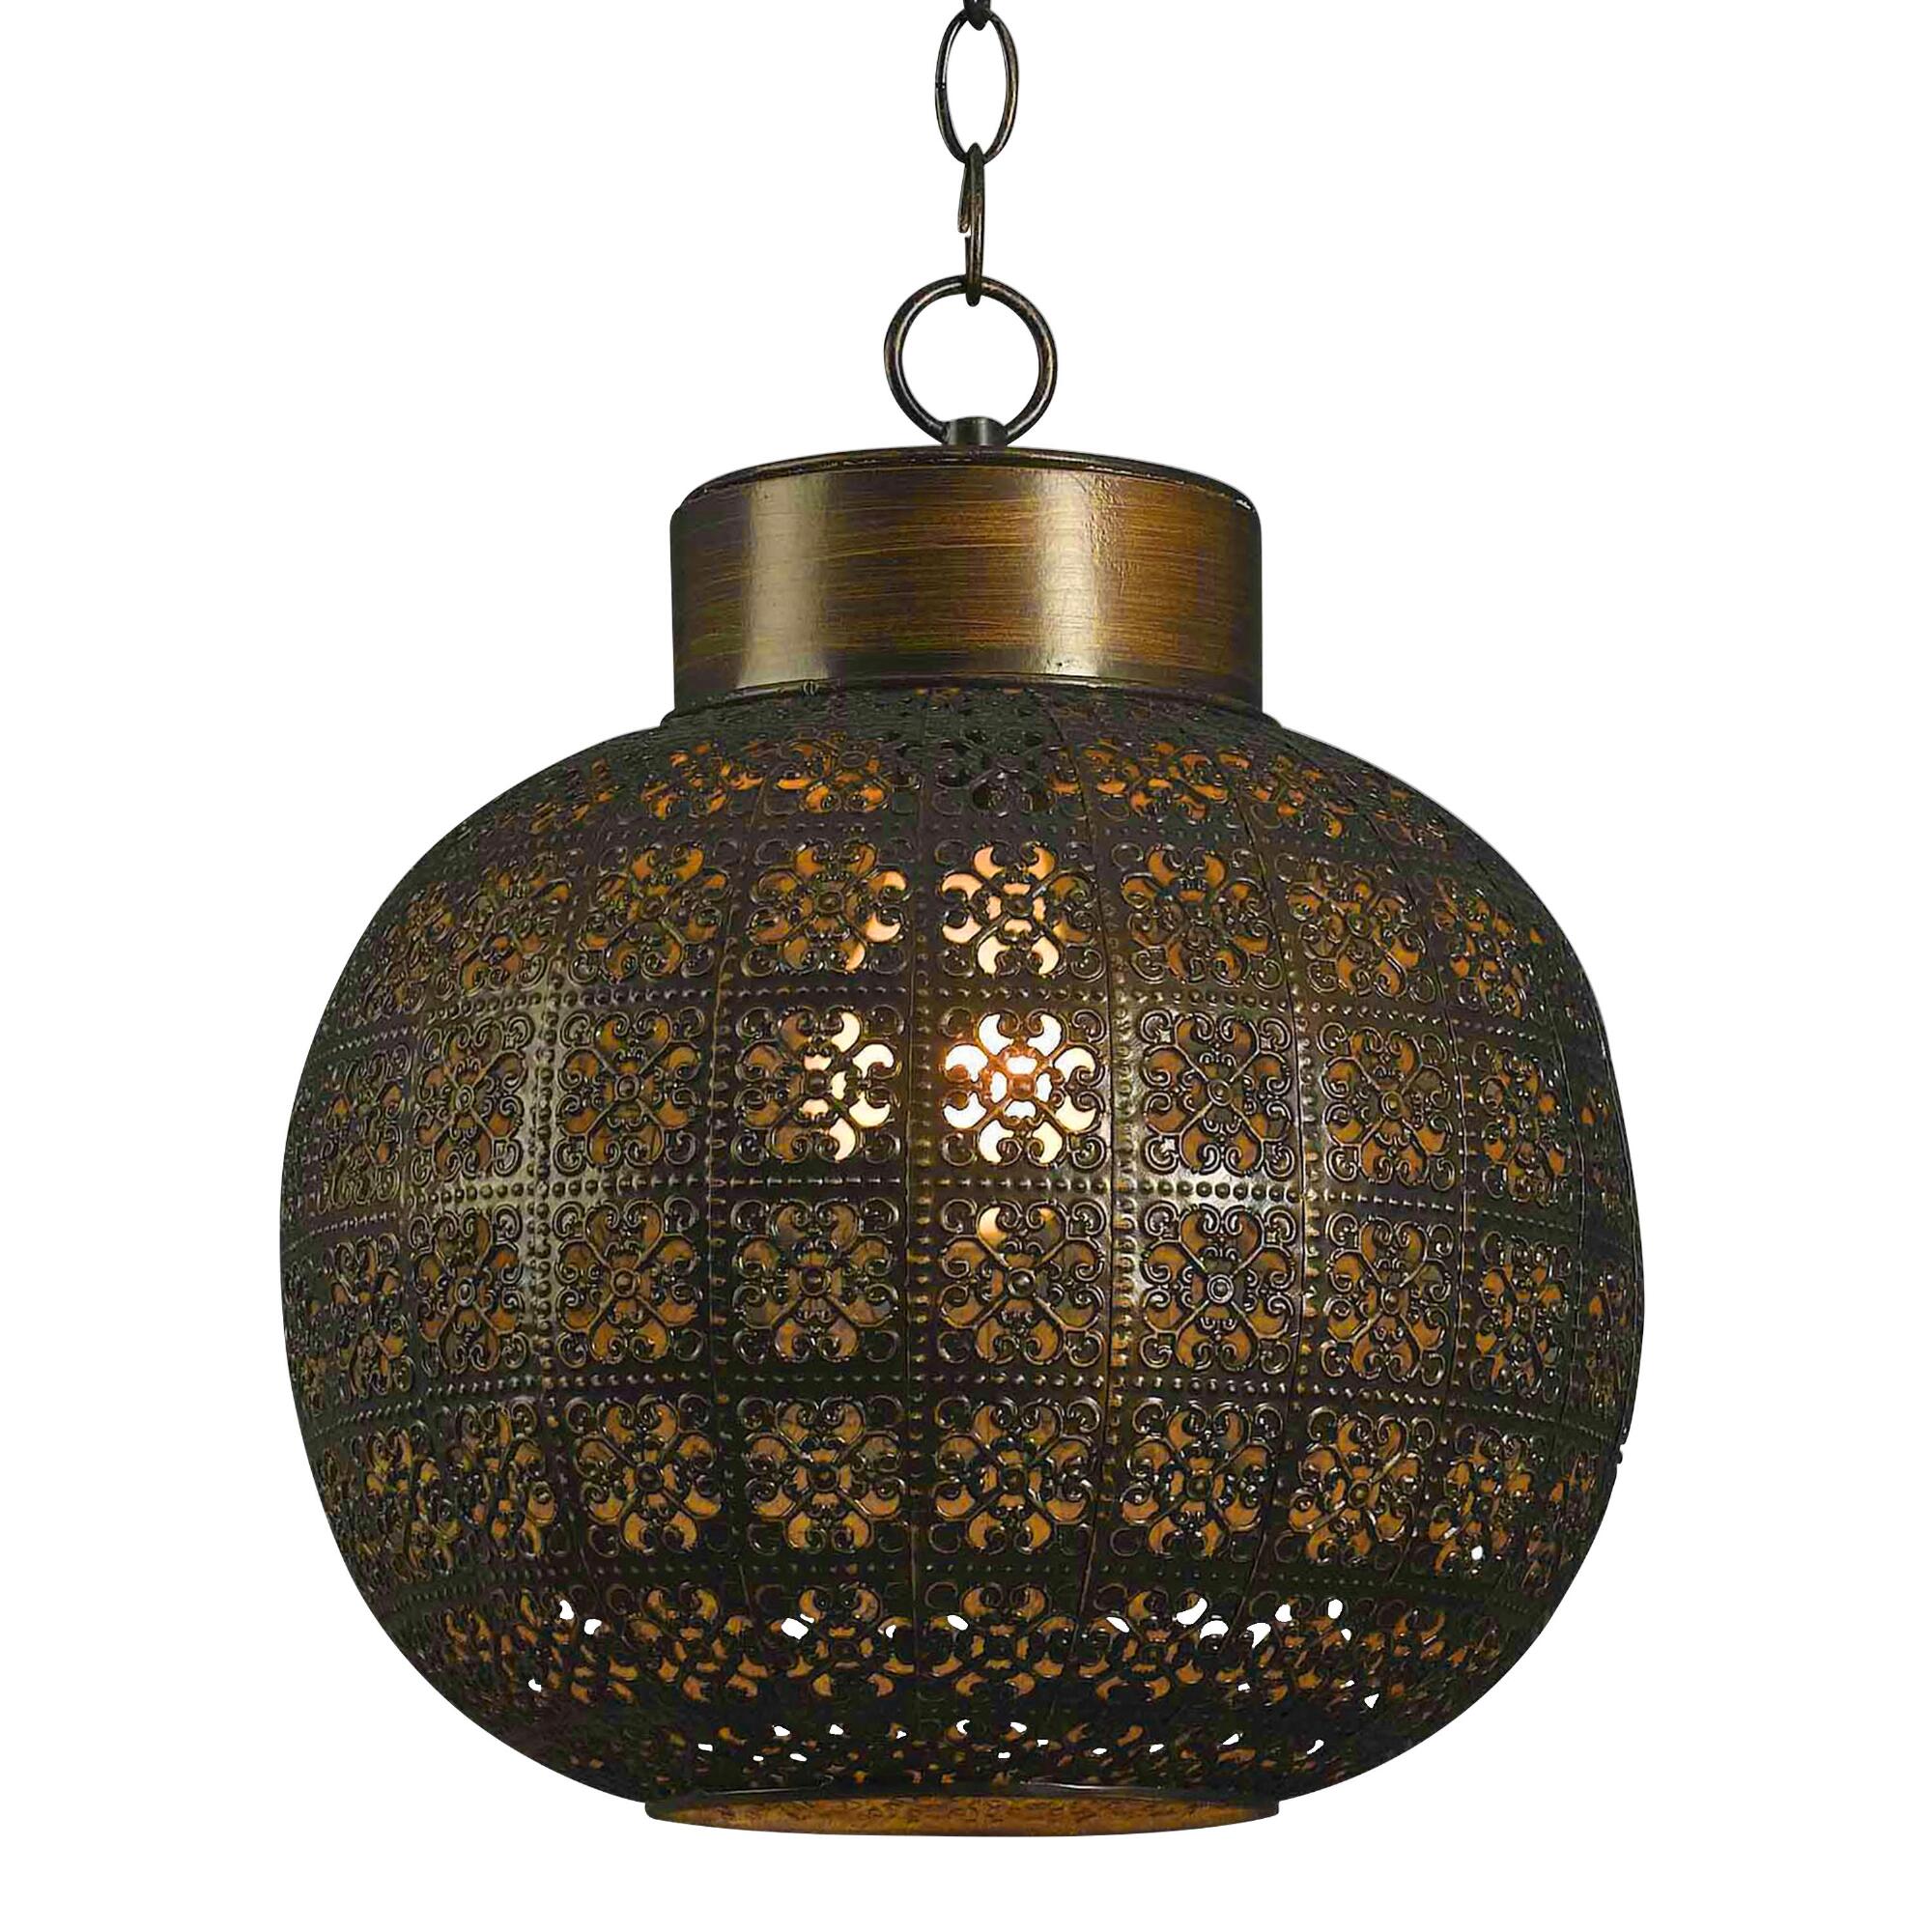 Aged Bronze Punched Metal Tile Pendant Lamp by World Market